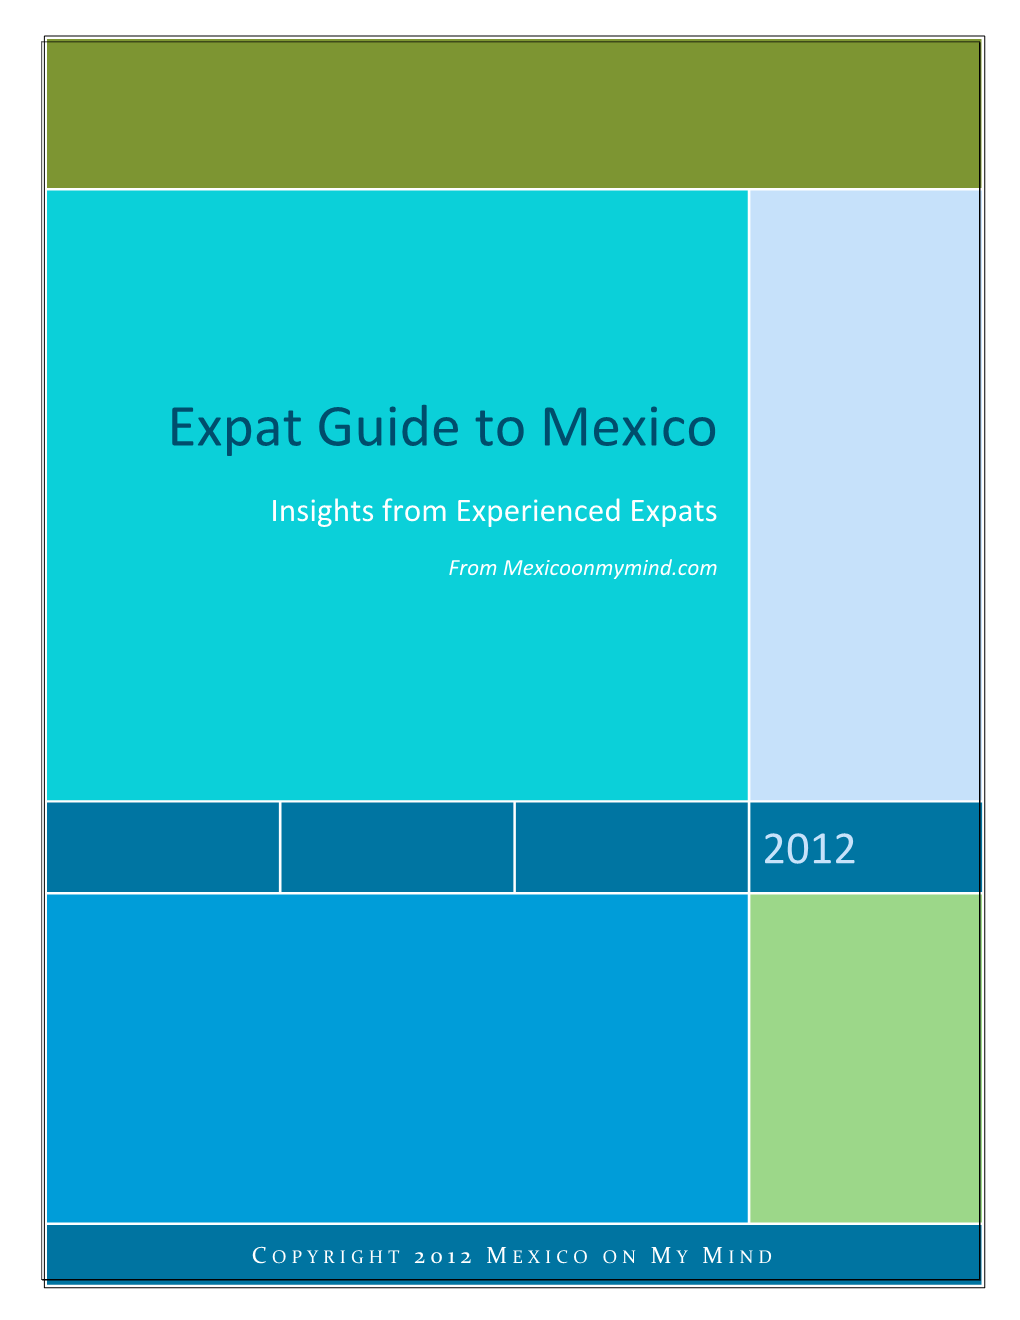 Expat Guide to Mexico